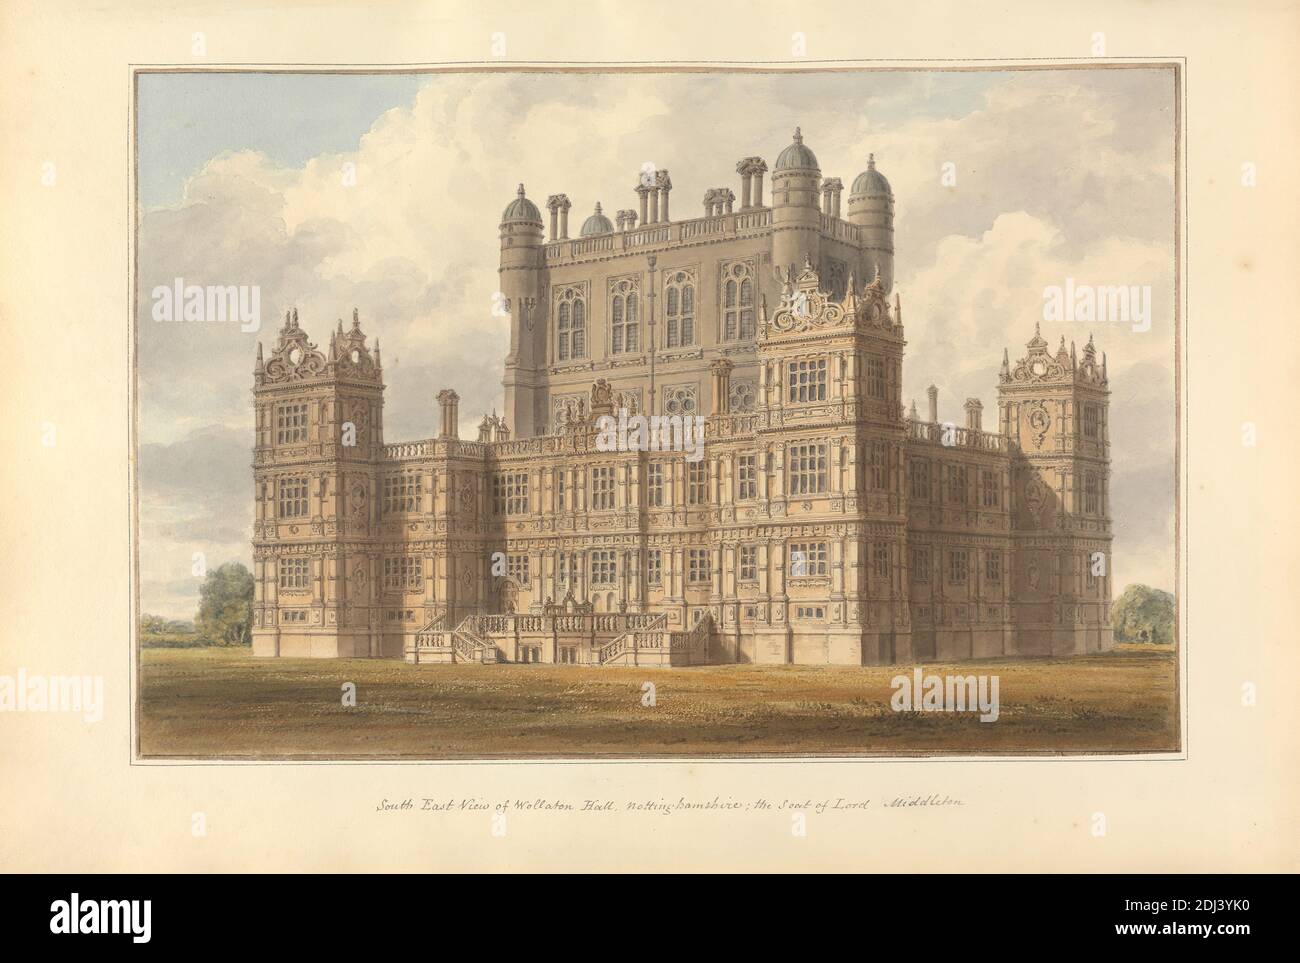 South East View of Wollaton Hall. Nottinghamshire; the Seat of Lord Middleton, John Buckler FSA, 1770–1851, British, and John Chessell Buckler, 1793–1894, British, 1811, Watercolor and pen and black ink on moderately thick, cream wove paper, Sheet: 19 3/4 × 14 inches (50.2 × 35.6 cm) and Image: 10 3/8 × 15 3/4 inches (26.4 × 40 cm), architectural subject, balustrades, country house, Elizabethan, Jacobean, mullions, pilasters, turrets, windows, England, Europe, Nottinghamshire, United Kingdom, Wollaton Stock Photo